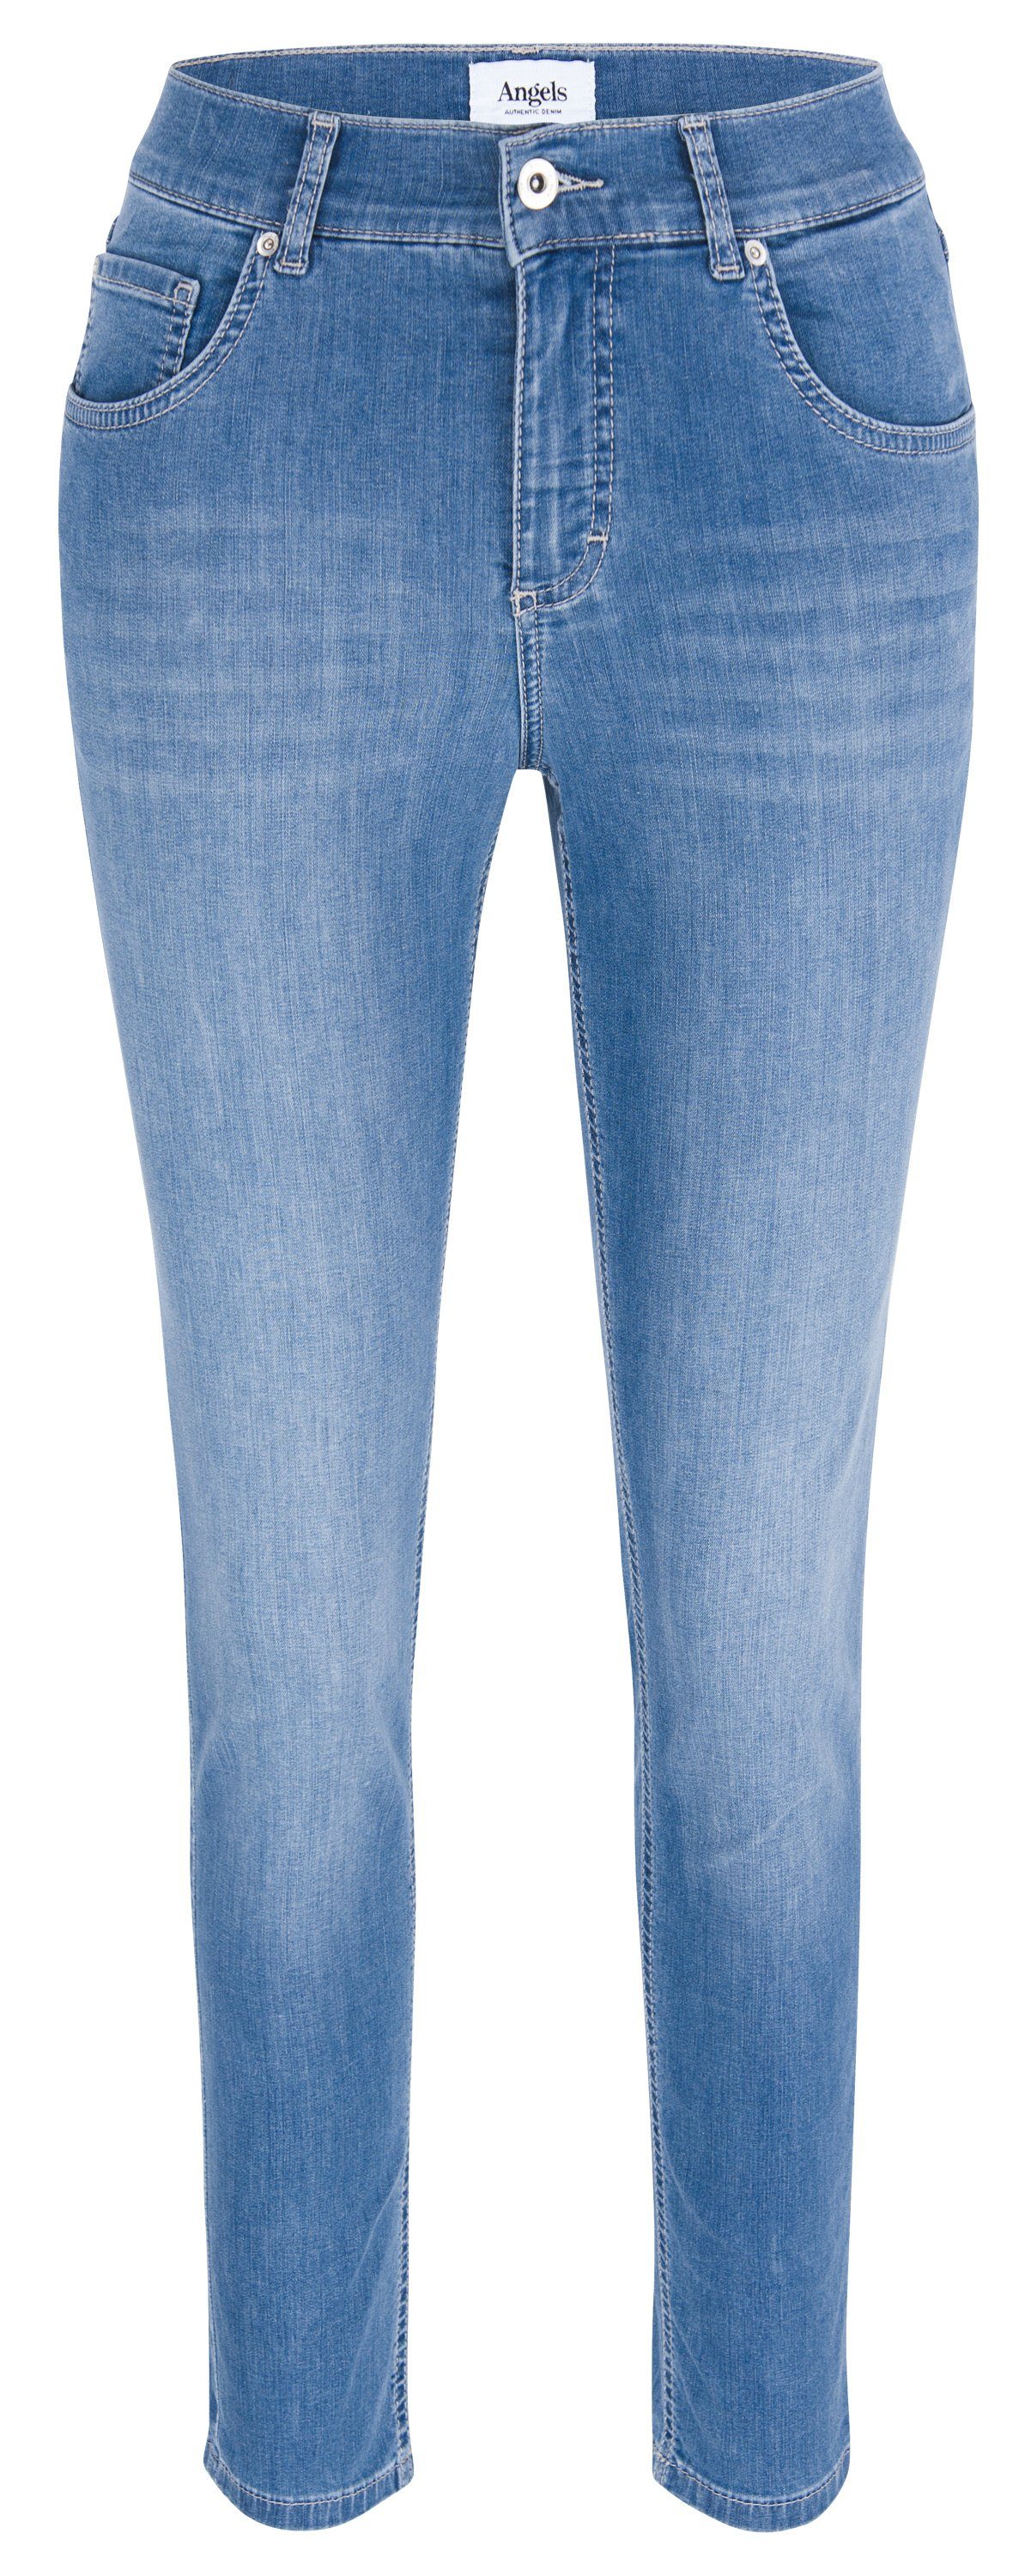 ANGELS Stretch-Jeans ANGELS JEANS SKINNY light blue used 332 1200.3458